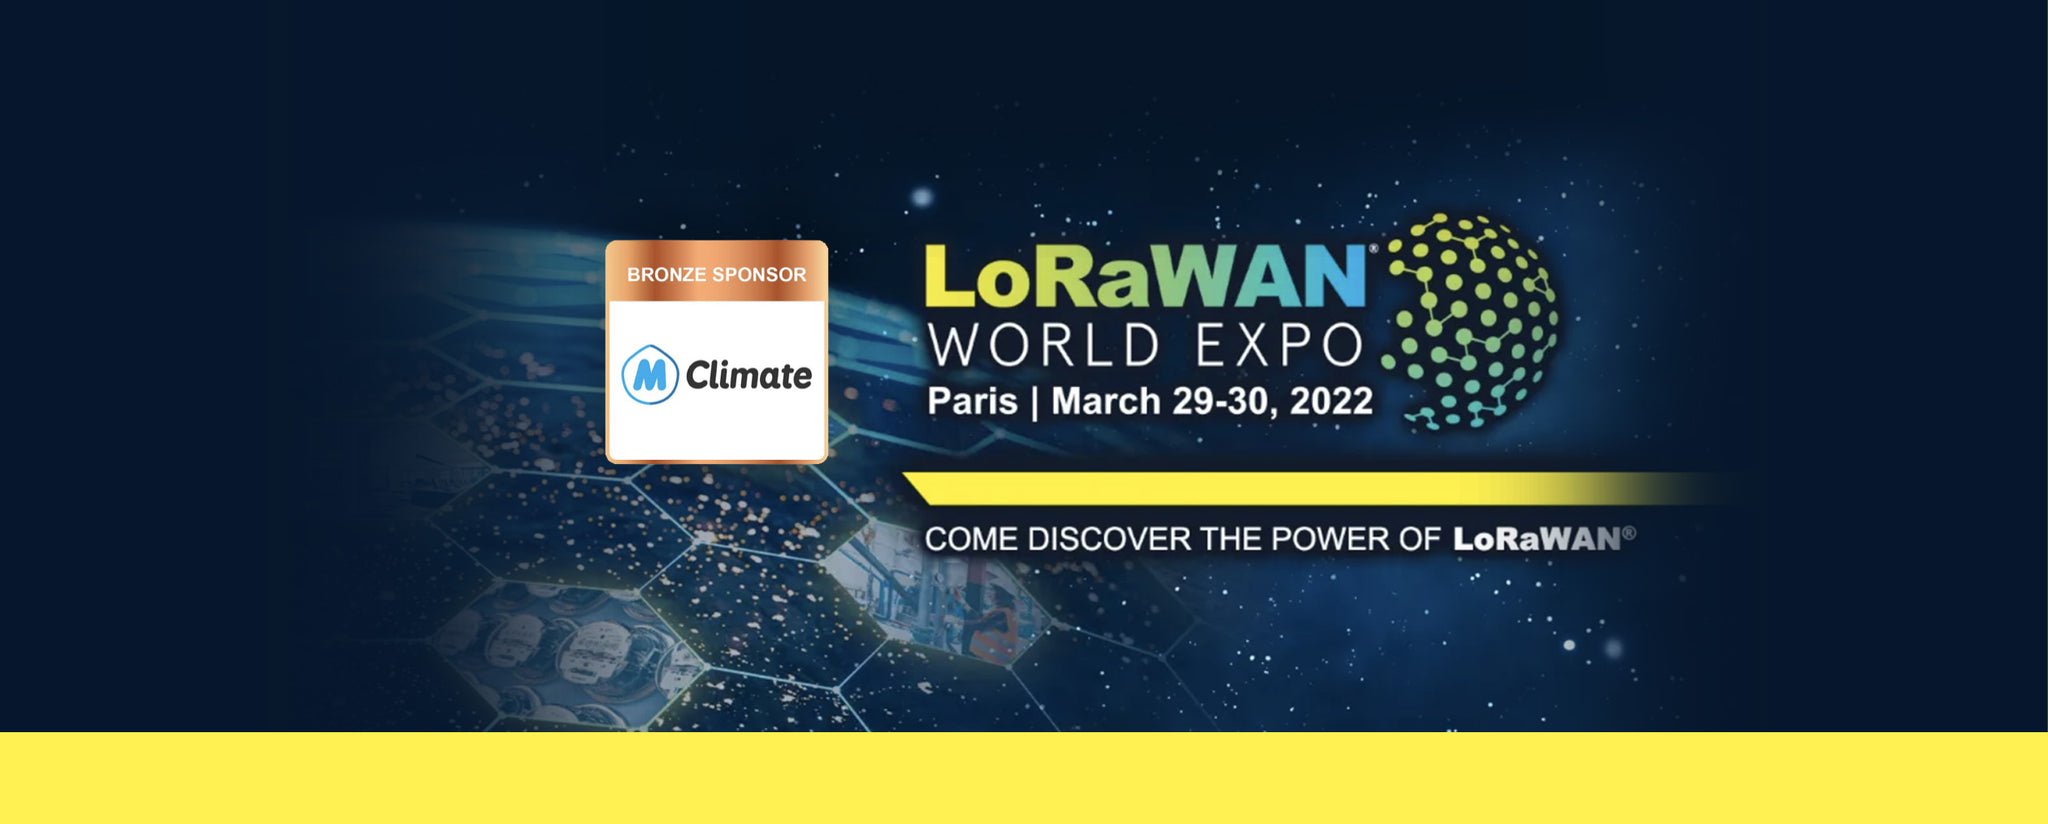 We are excited to be a bronze sponsor of the LoRaWAN World Expo 2022